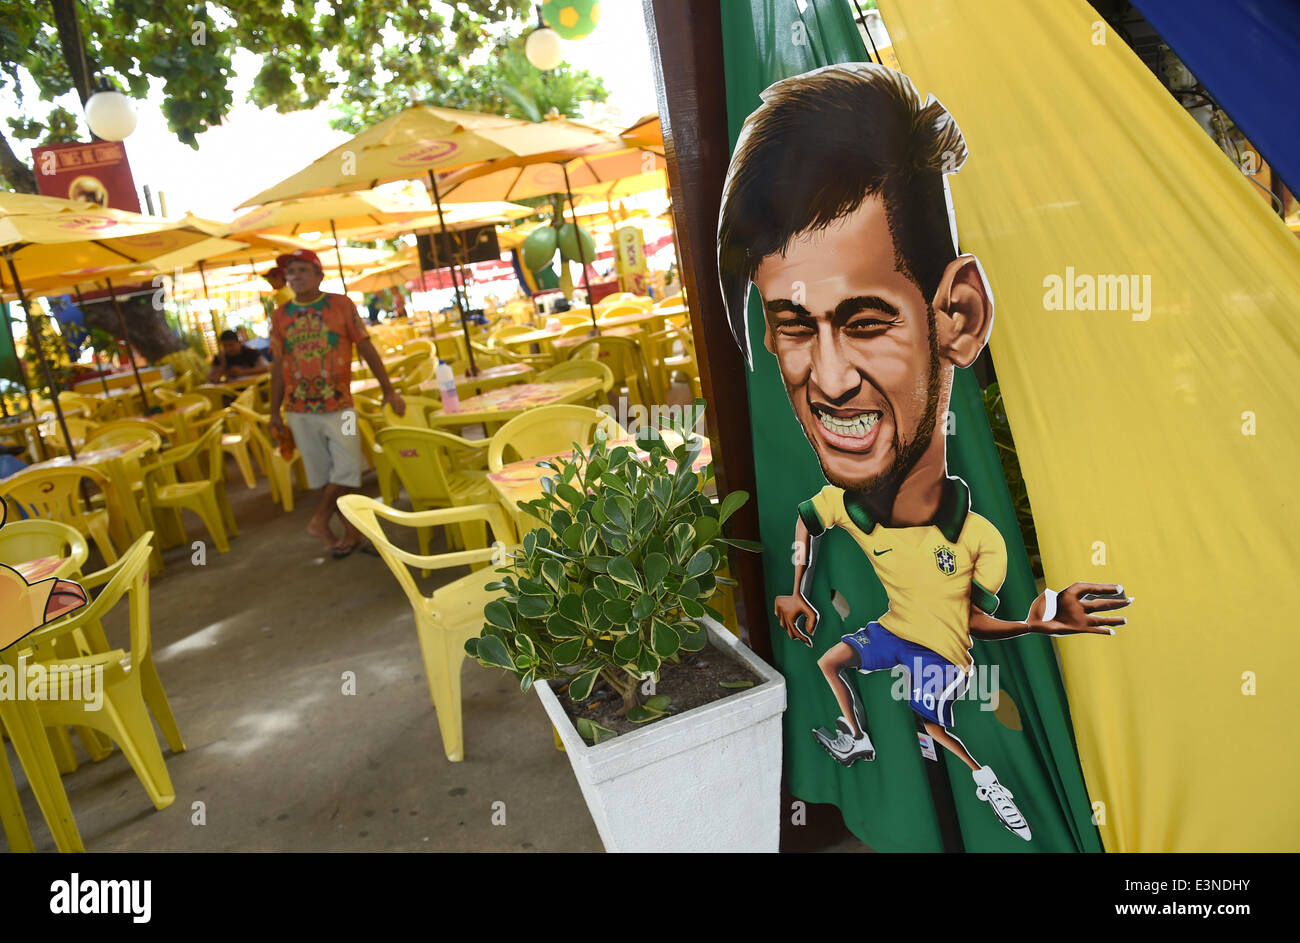 Fortaleza, Brazil. 20th June, 2014. A caricature of Brazil's Neymar is seen at a street bar in Fortaleza, Brazil, 20 June 2014. The FIFA World Cup will take place in Brazil from 12 June to 13 July 2014. Photo: Marcus Brandt/dpa/Alamy Live News Stock Photo